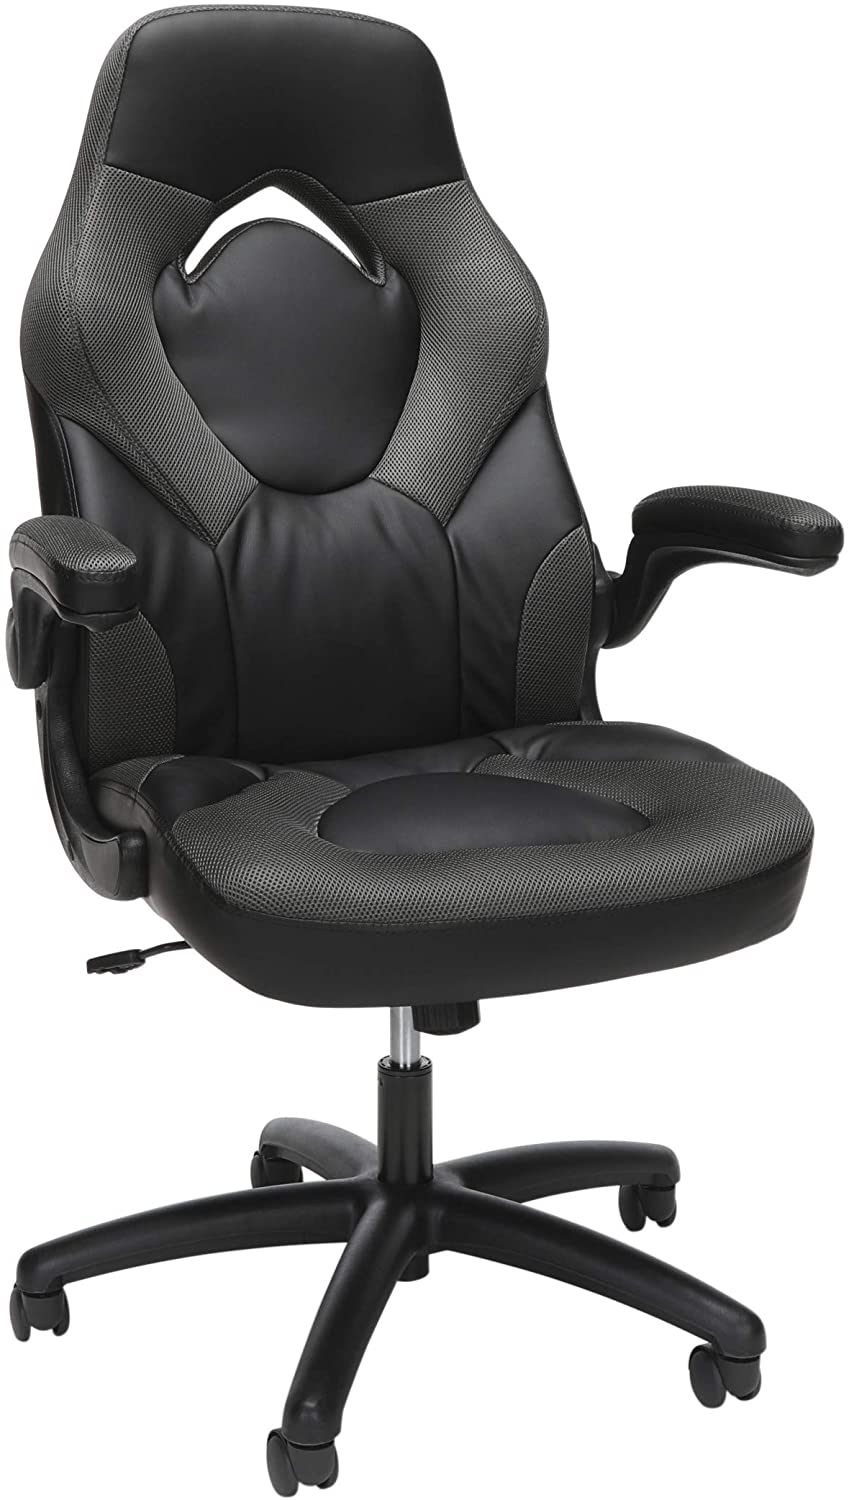 2. OFM ESS Collection Racing Style Bonded ( Leather Gaming Chair)